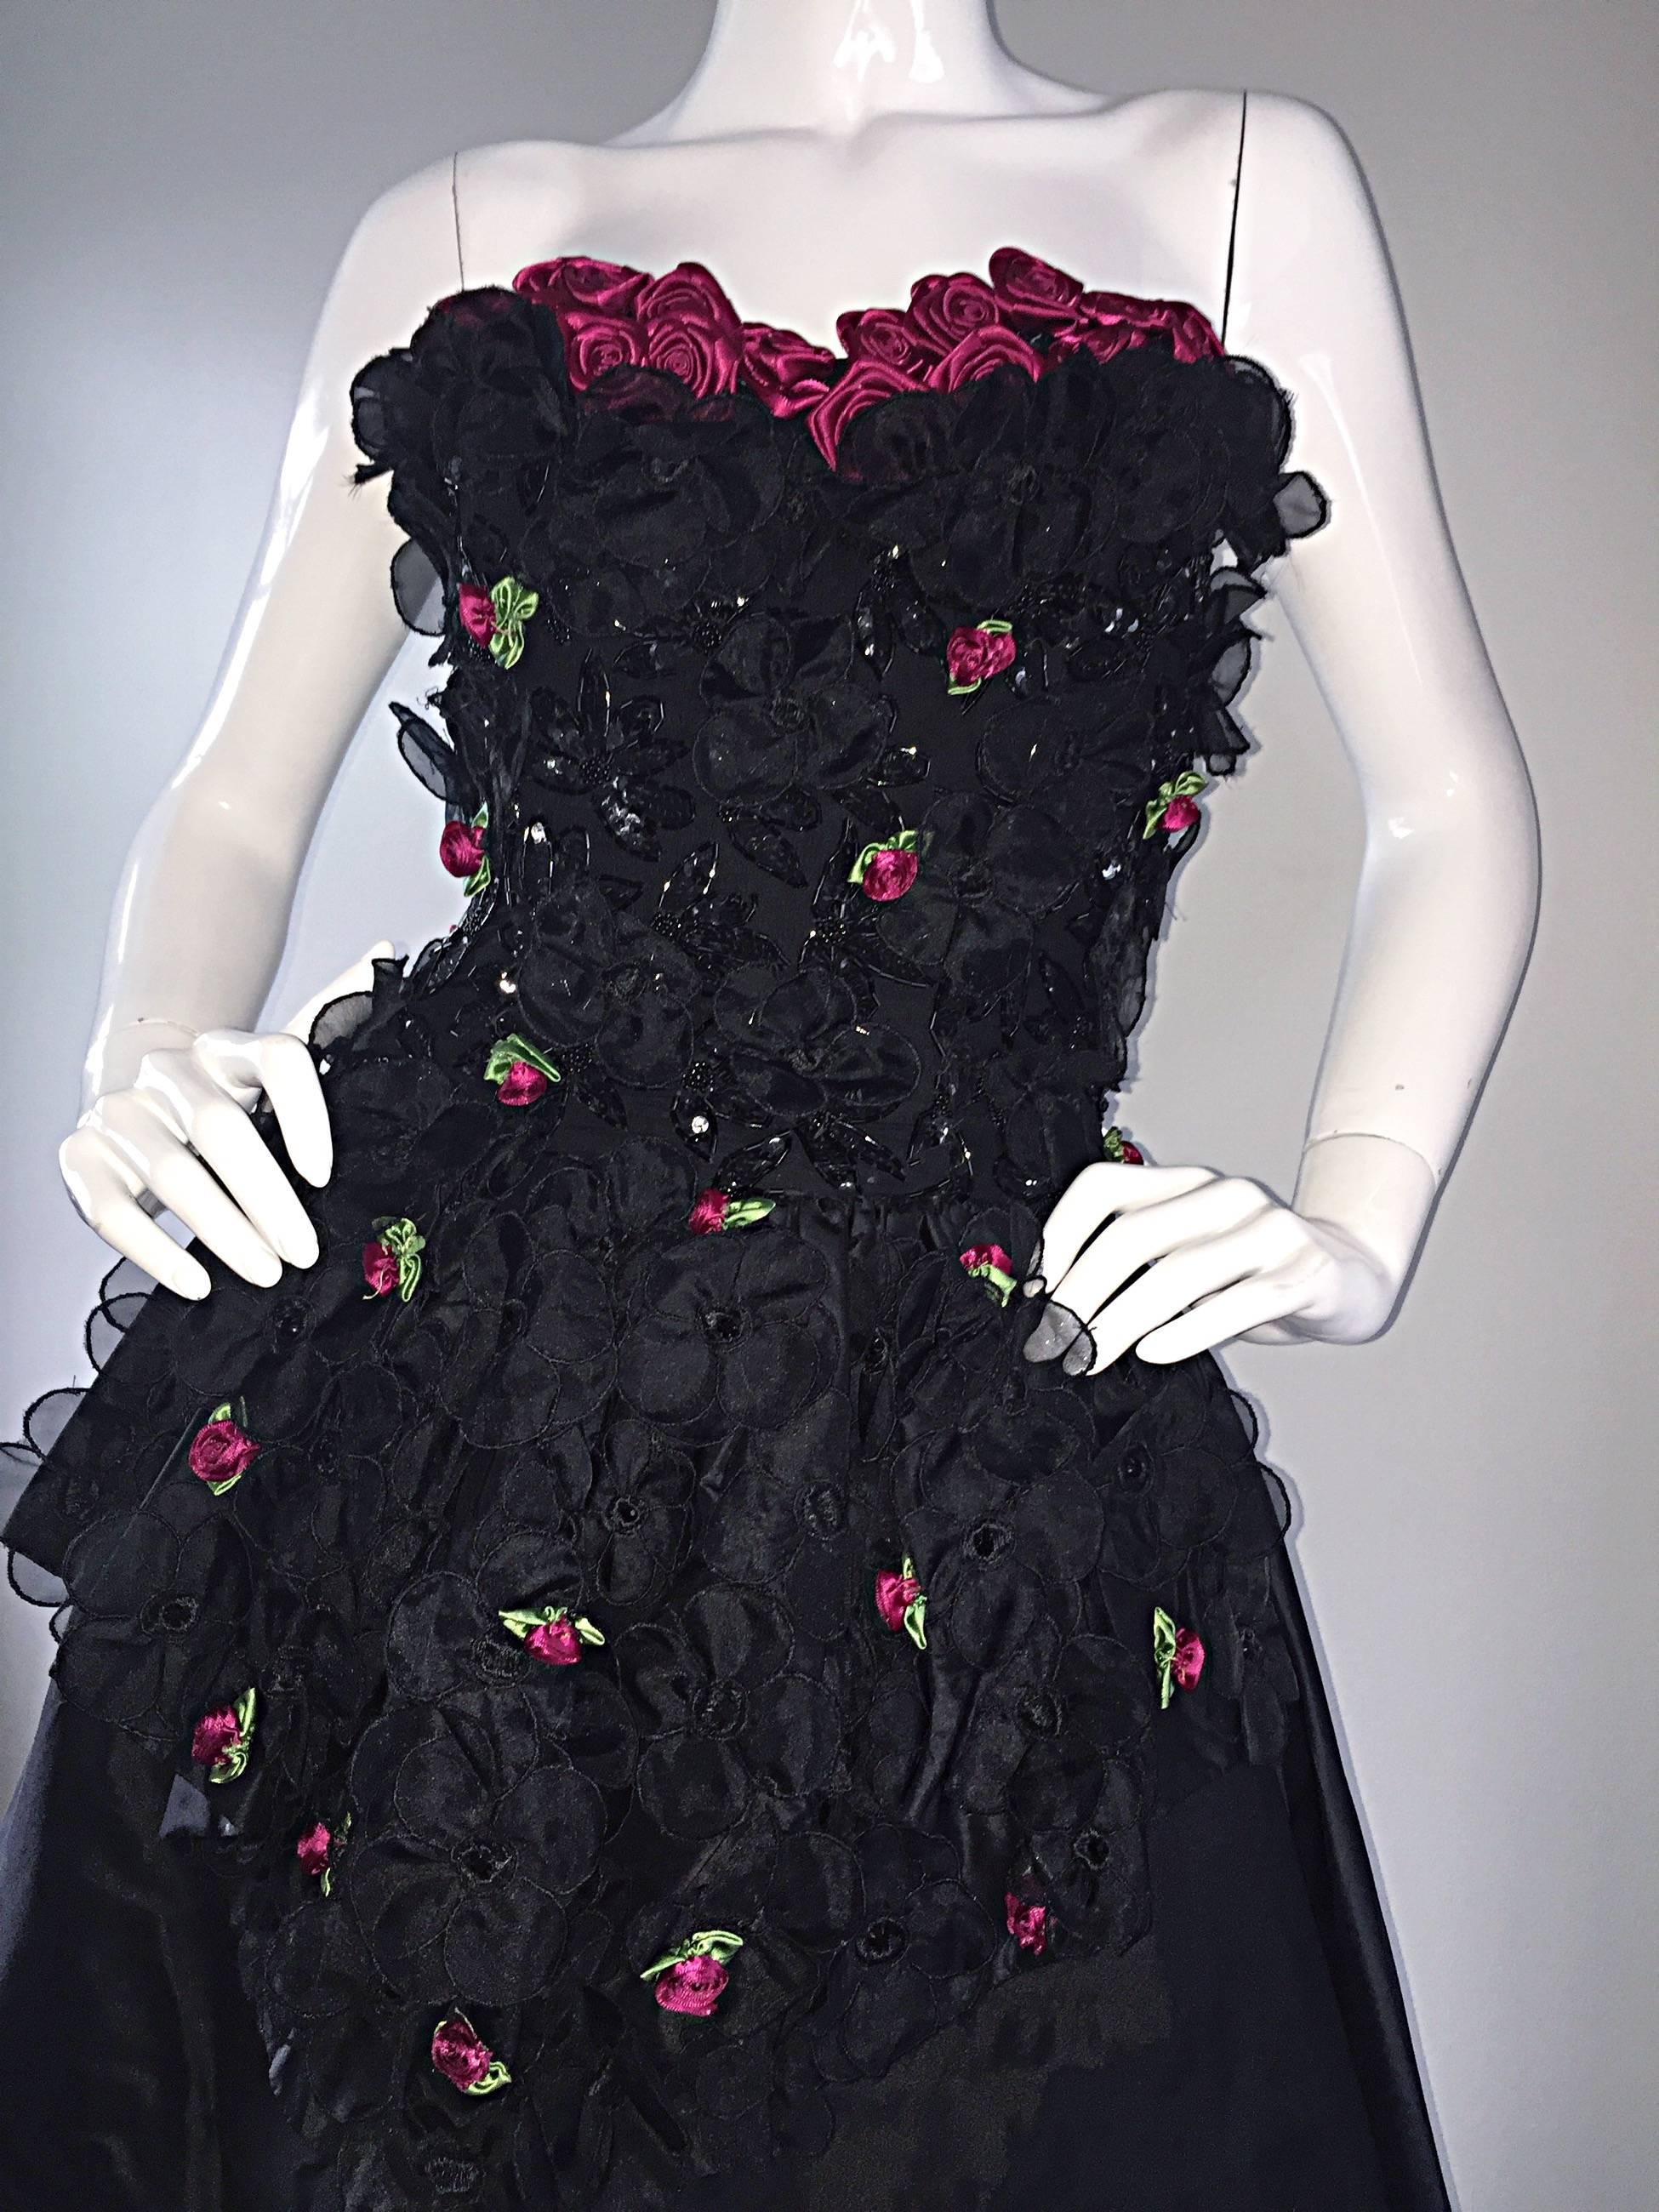 Exceptional 1950s Vintage Black Silk Taffeta Hi - Lo Dress w/ Rosettes and Lace For Sale 3